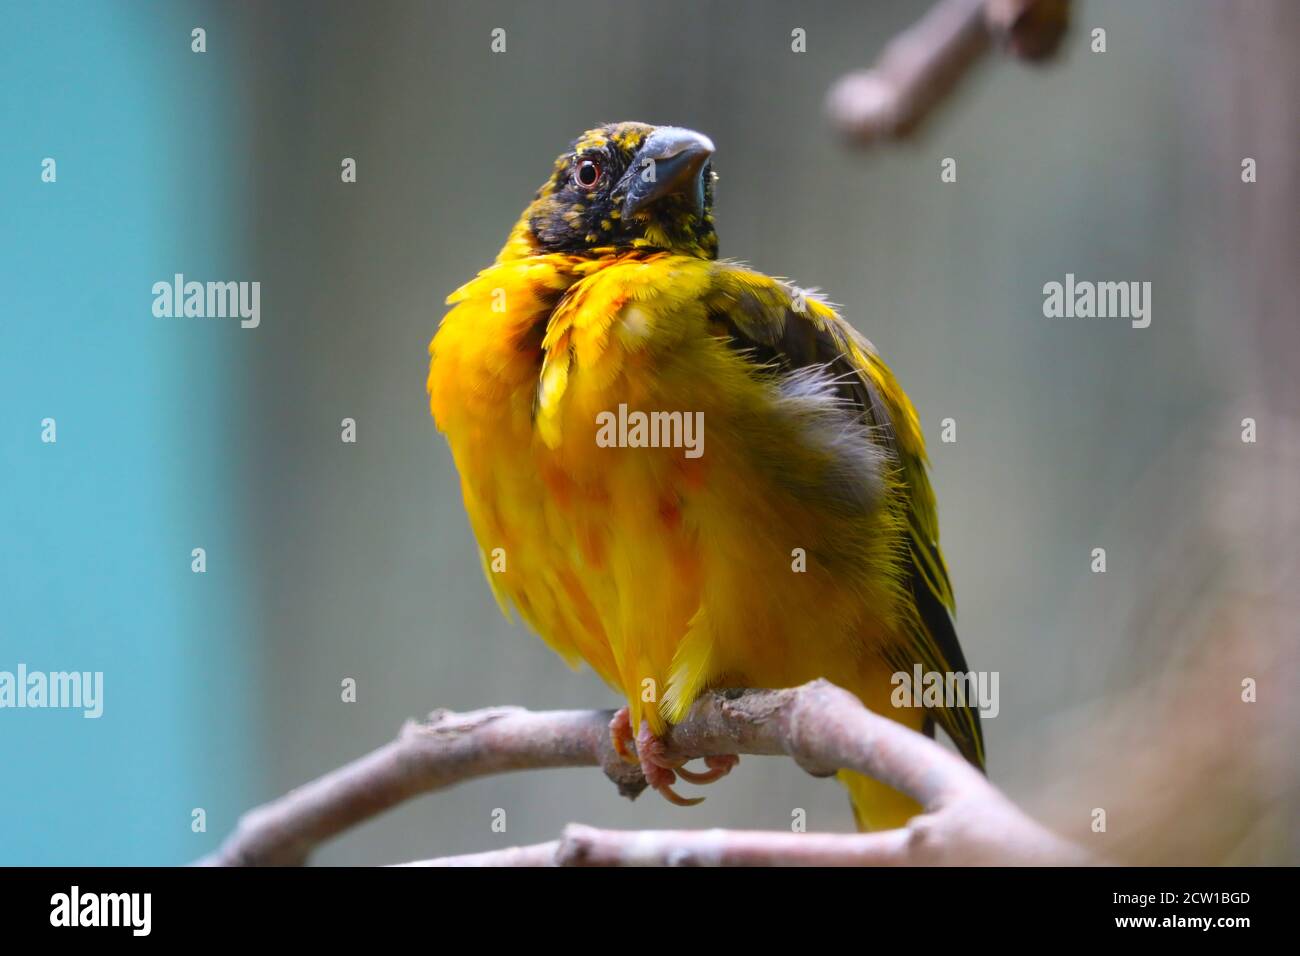 Fluffed up village weaver, ploceus cucullatus perching on a branch Stock Photo